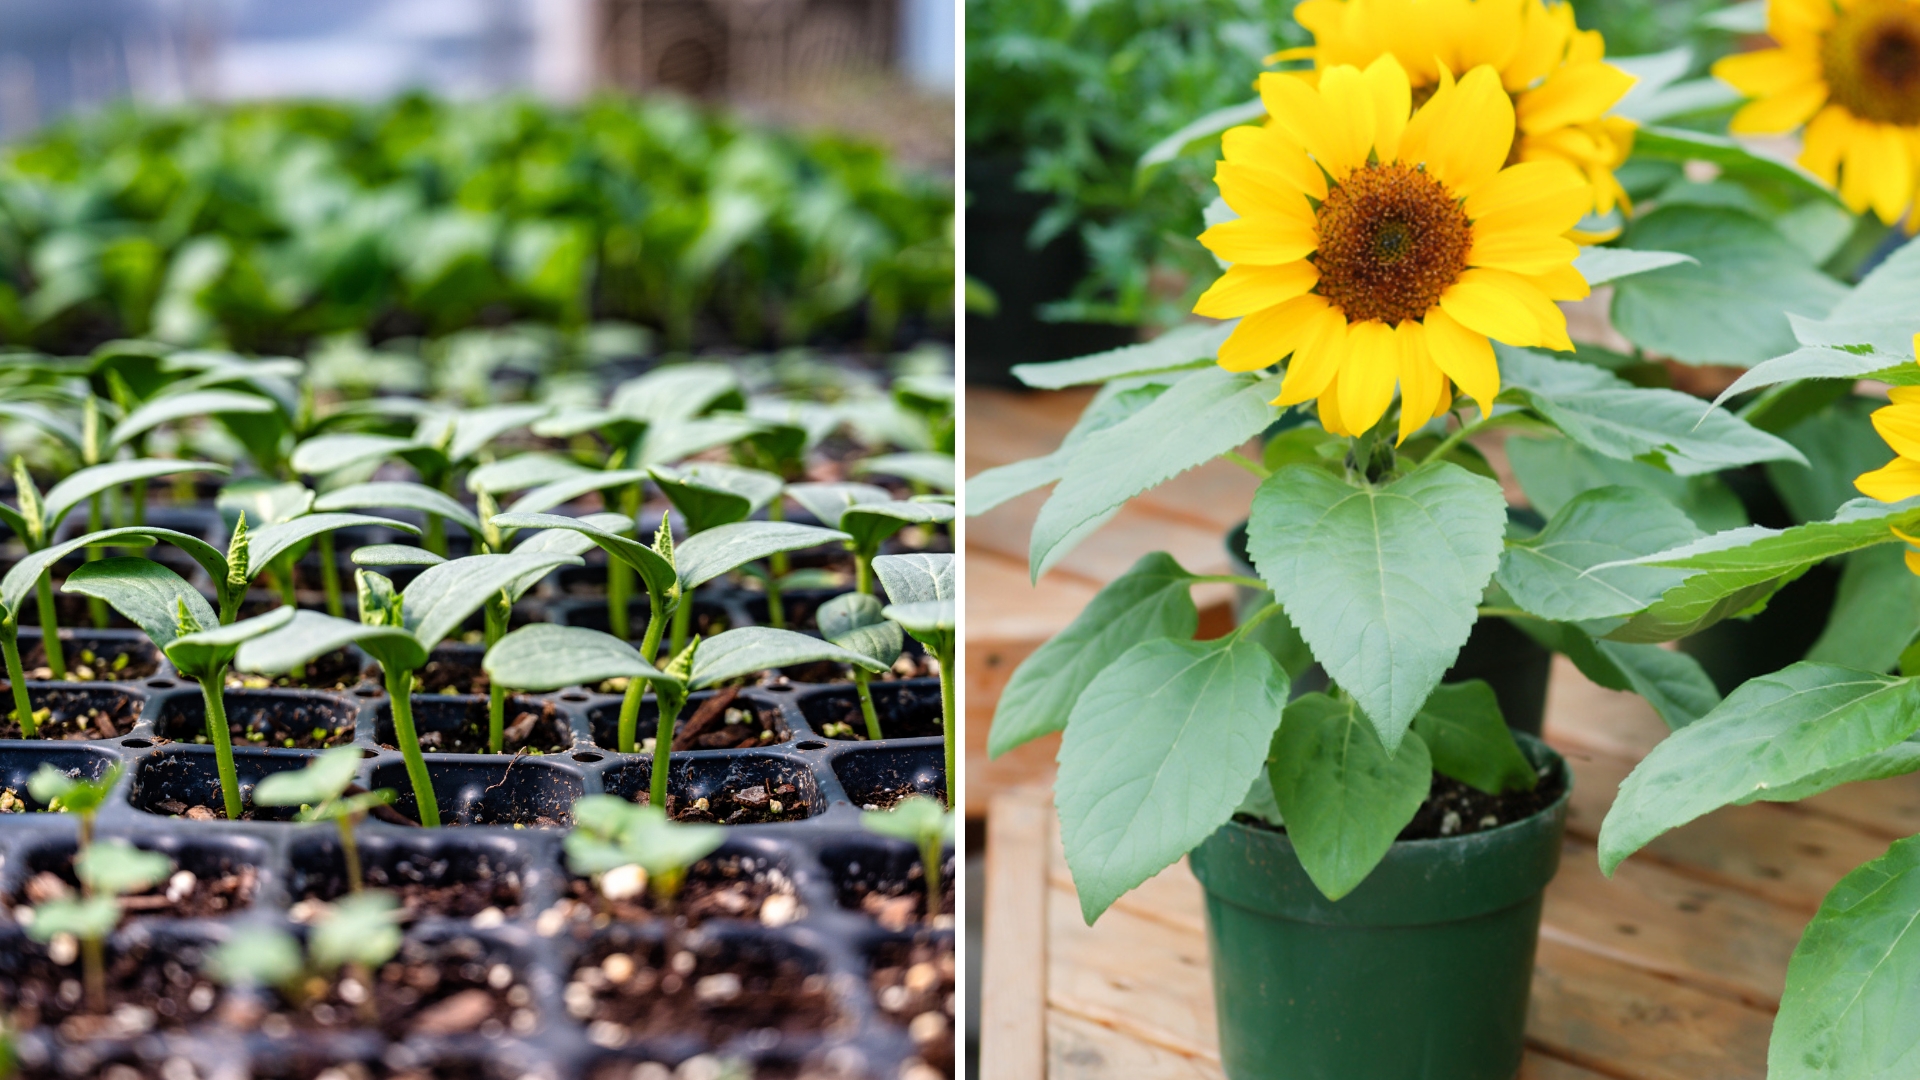 This Is When You Should Repot Sunflower Seedlings For Sky-High Growth And Dazzling Blossoms